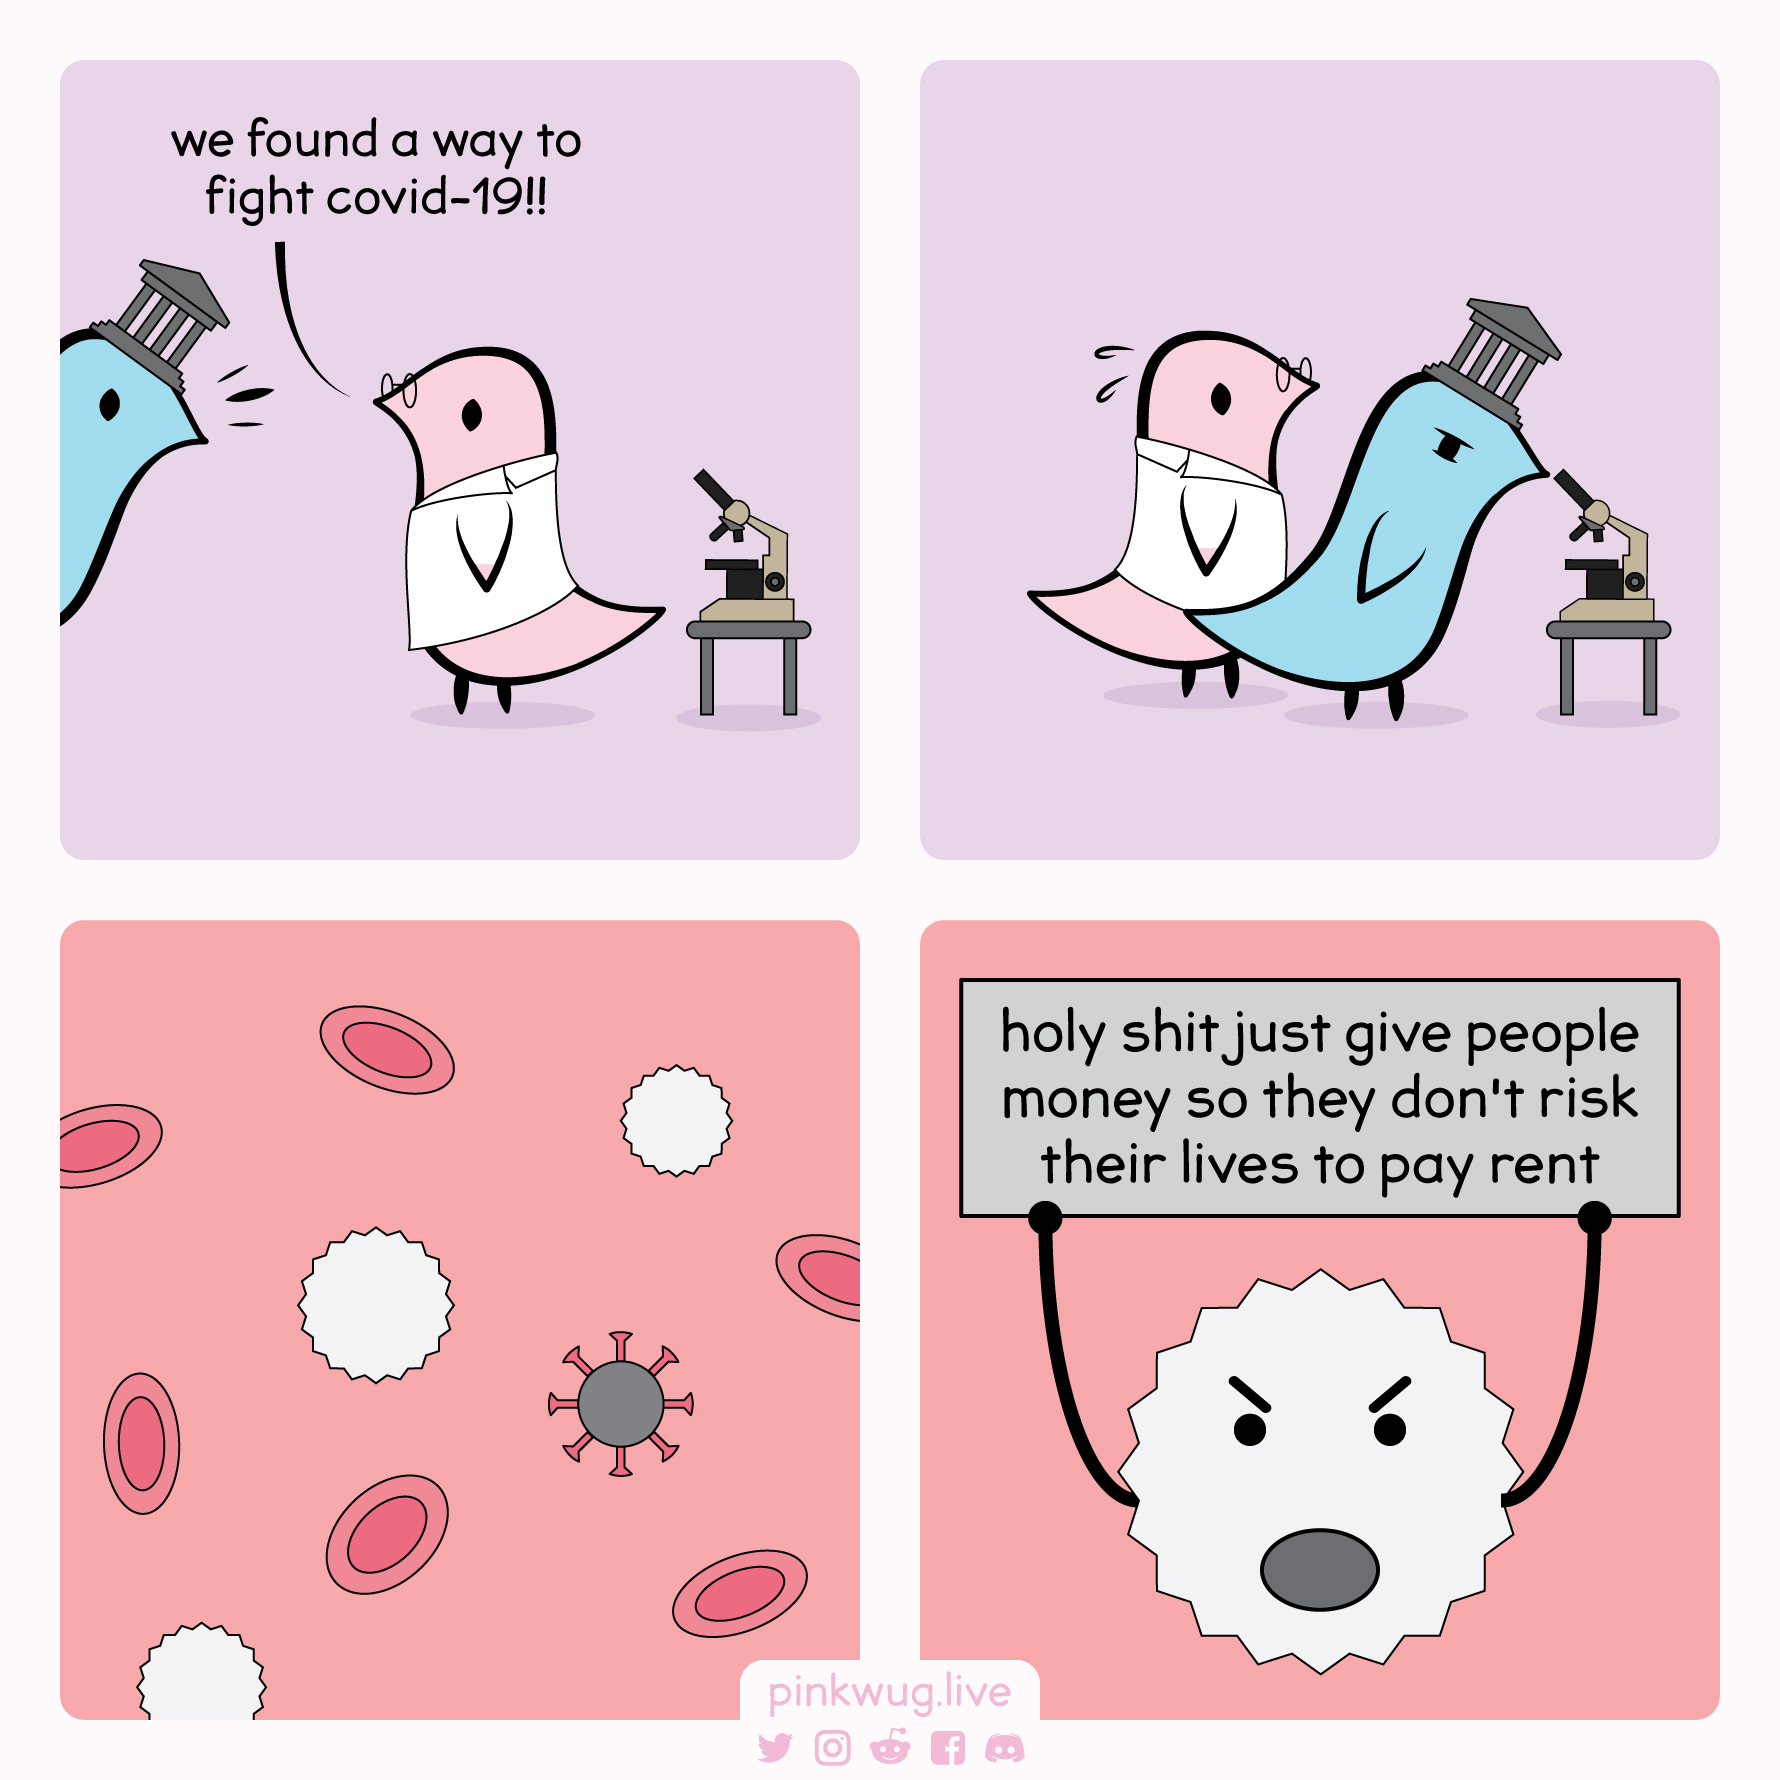 pinkwug comic: Scientists says "we found a way to fight covid-19!!"
GOP looks under the microscope.
The autoimmune cells shows a protest sign saying "holy shit just give people money so they don't risk their lives to pay rent"